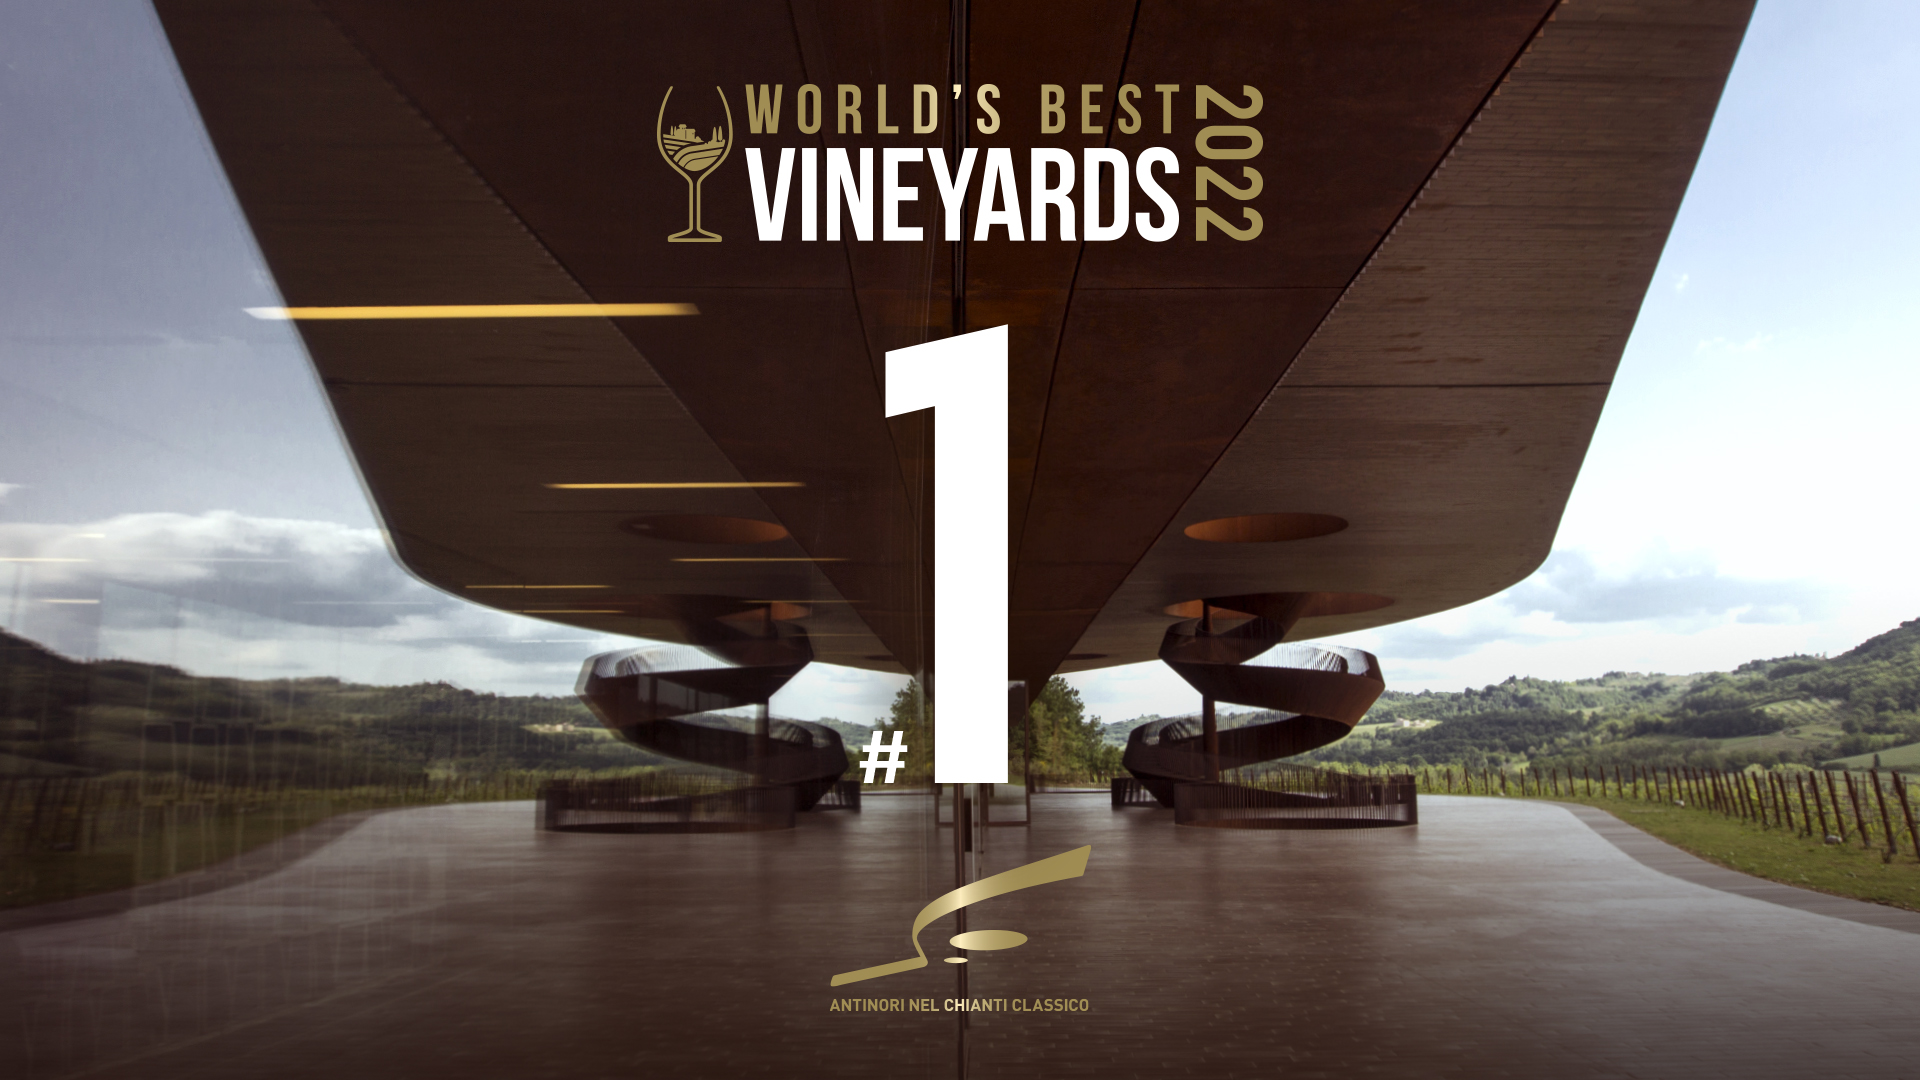 Congratulations to Antinori nel Chianti Classico winery that has been awarded first place in the World's Best Vineyards.